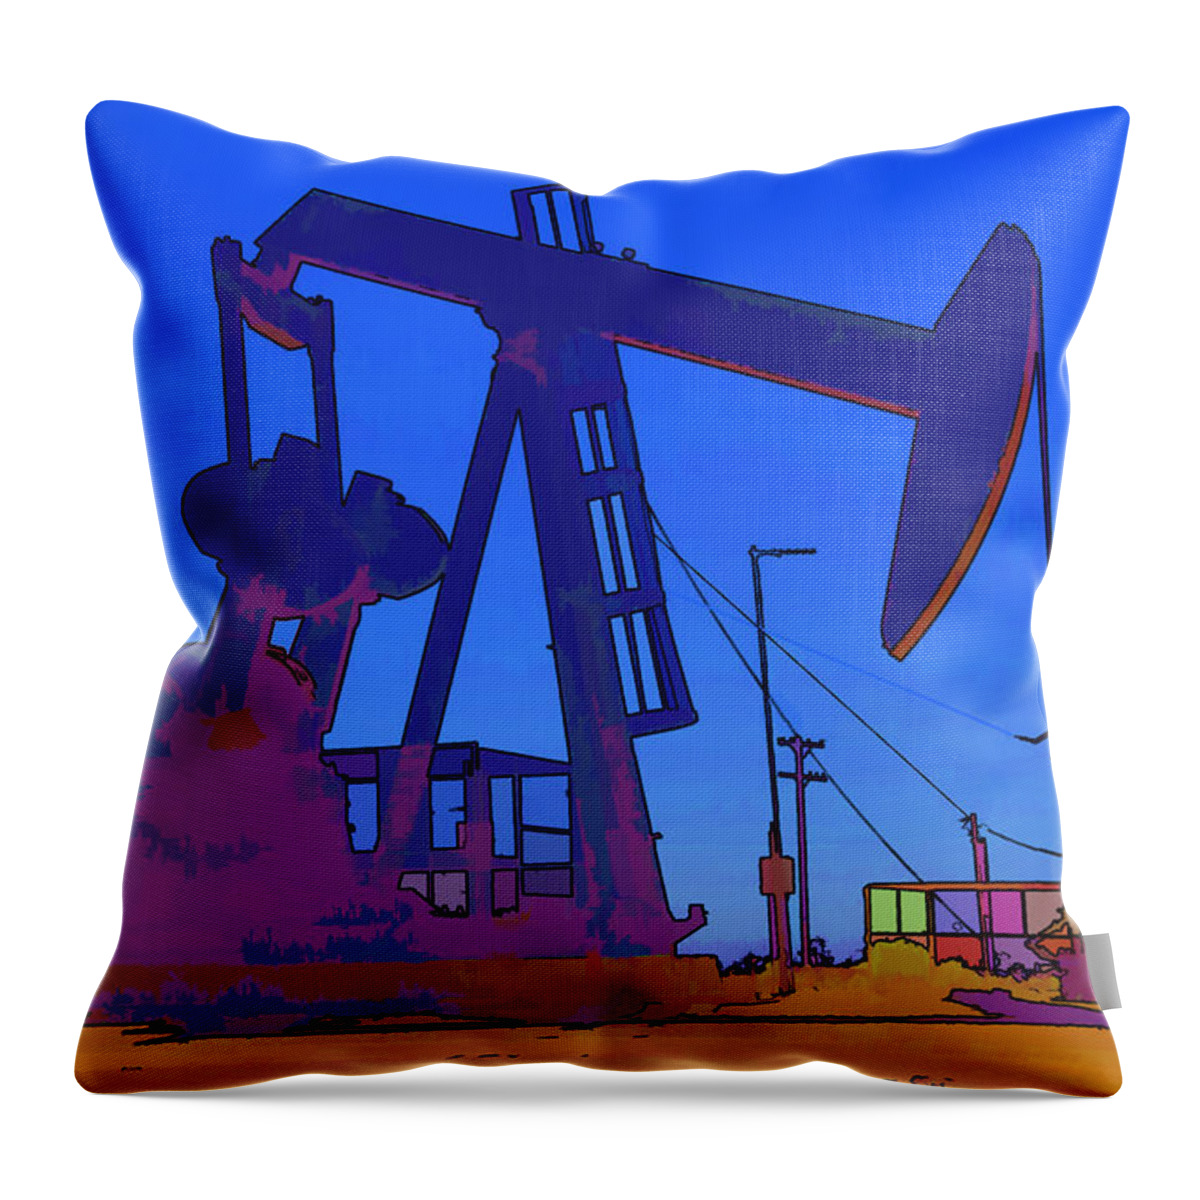 Oil Well Throw Pillow featuring the photograph Oil Well by Chuck Staley